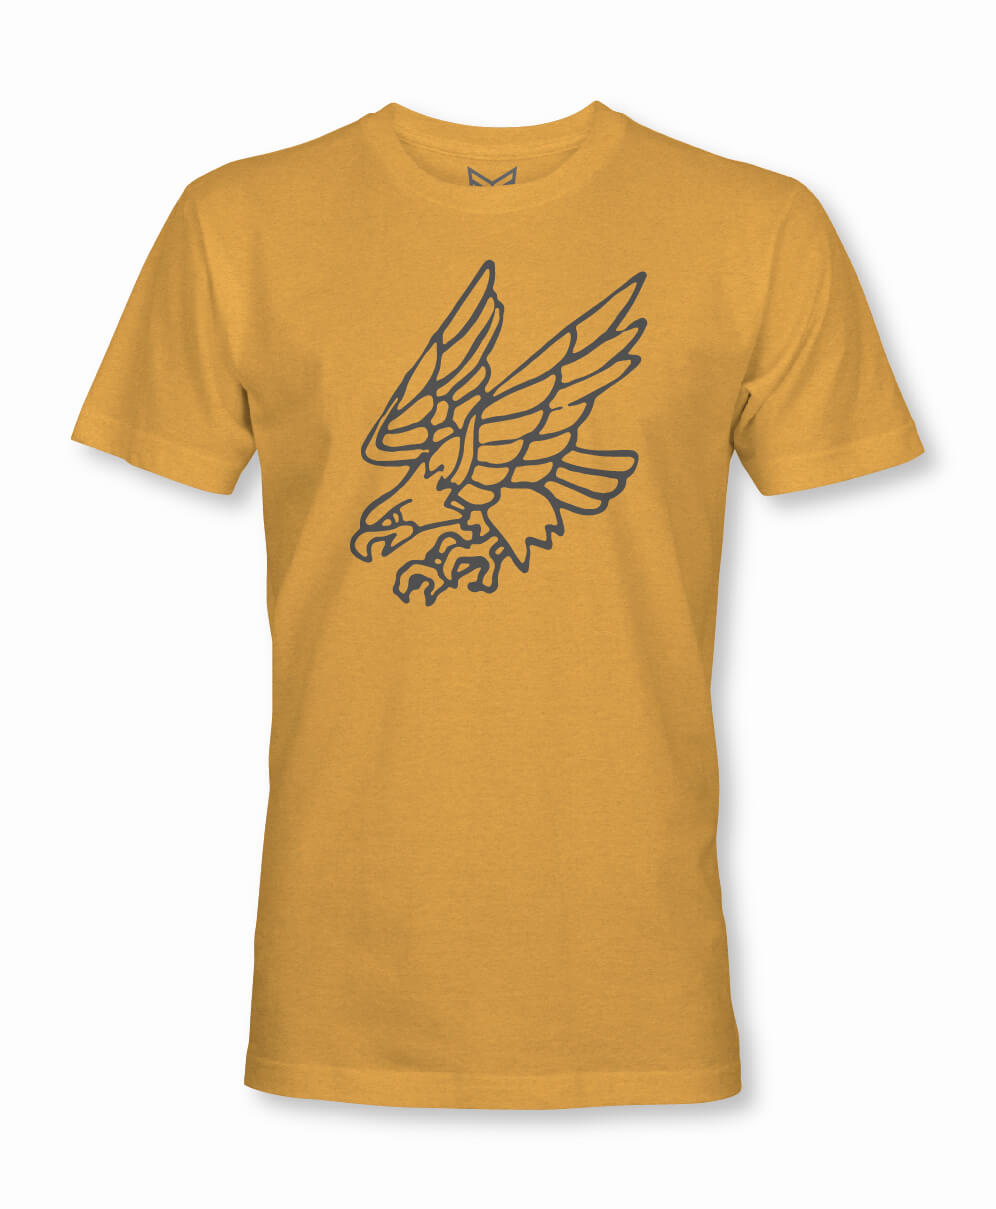 GET AFTER IT TEE - HEATHER MUSTARD